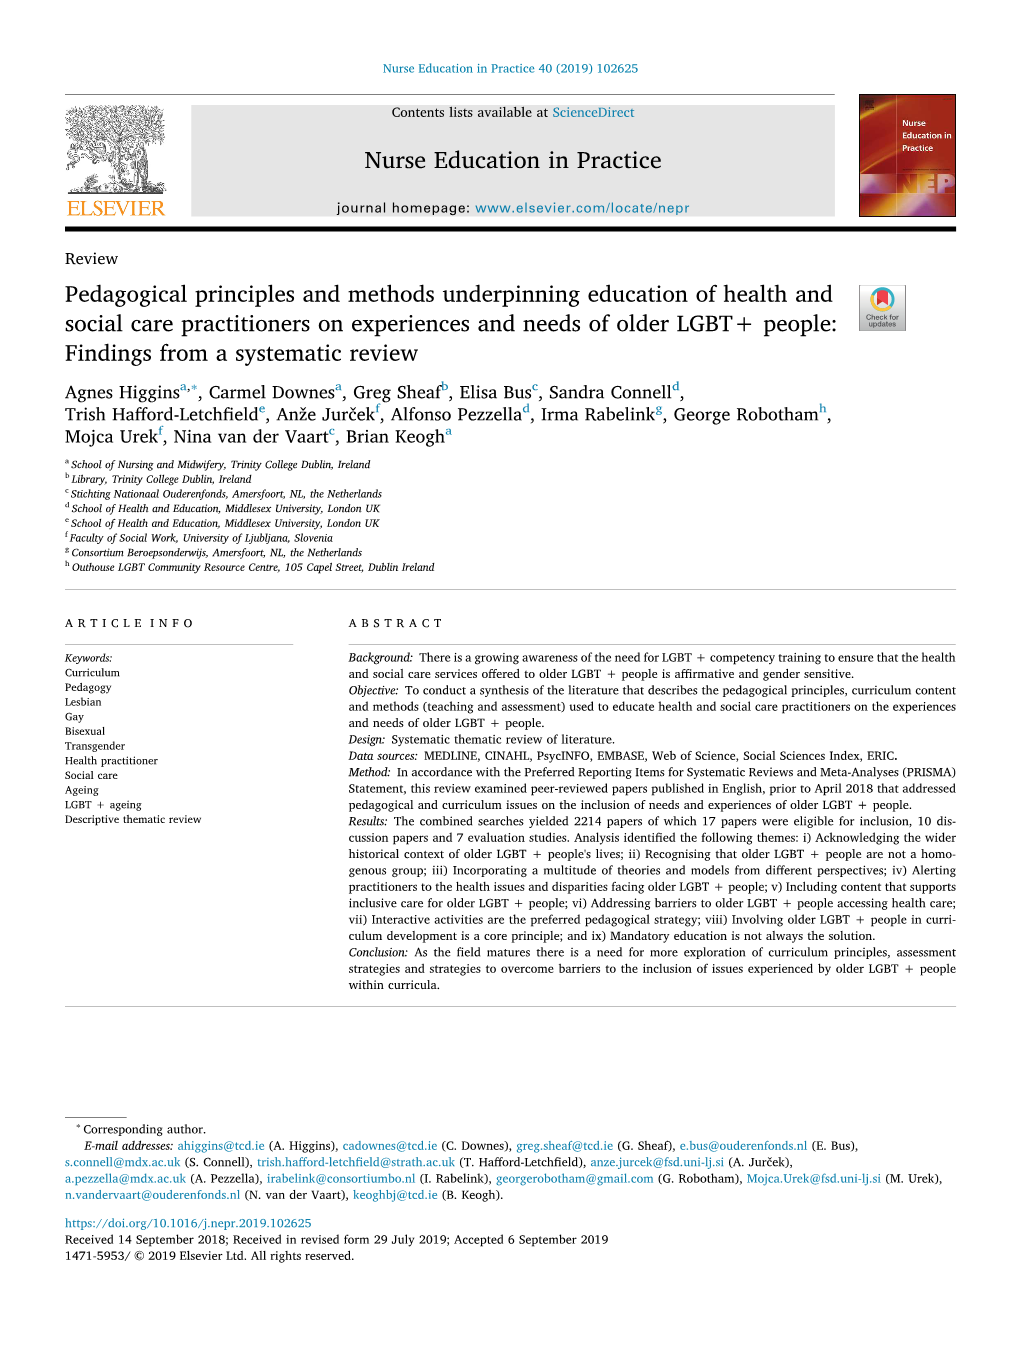 Pedagogical Principles and Methods Underpinning Education of Health